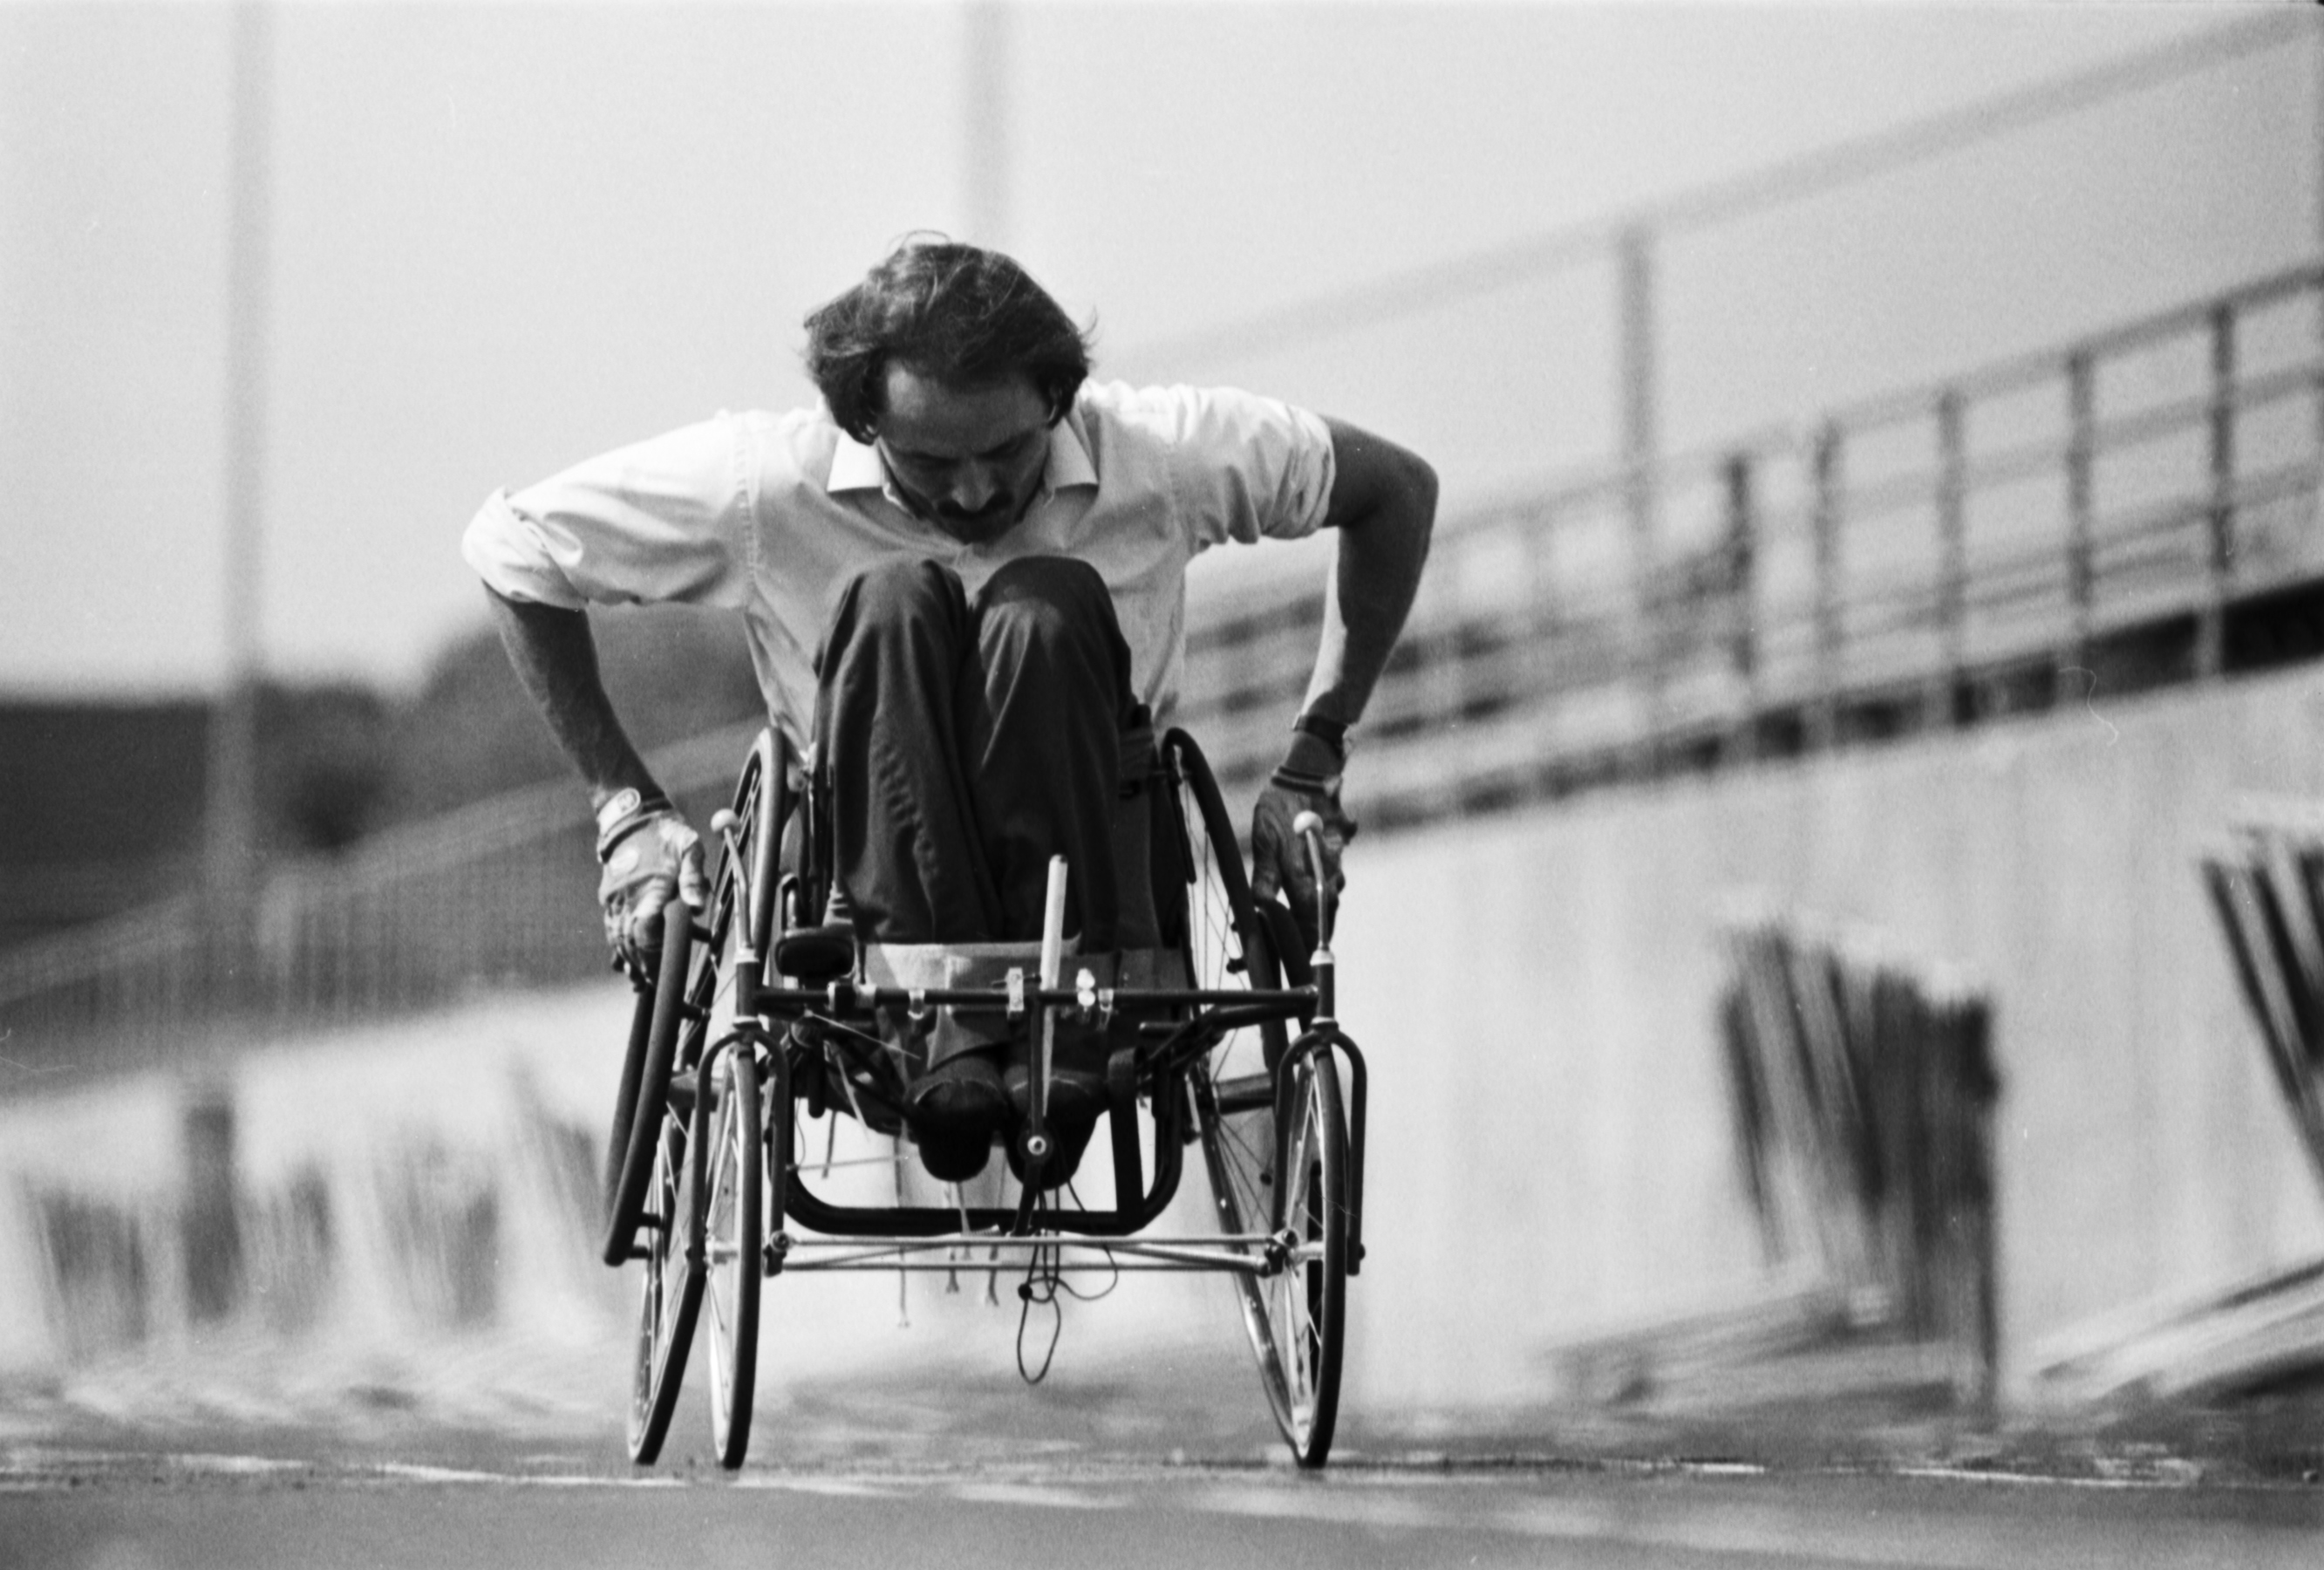 Black and white photo of a wheelchair user on a track practicing.